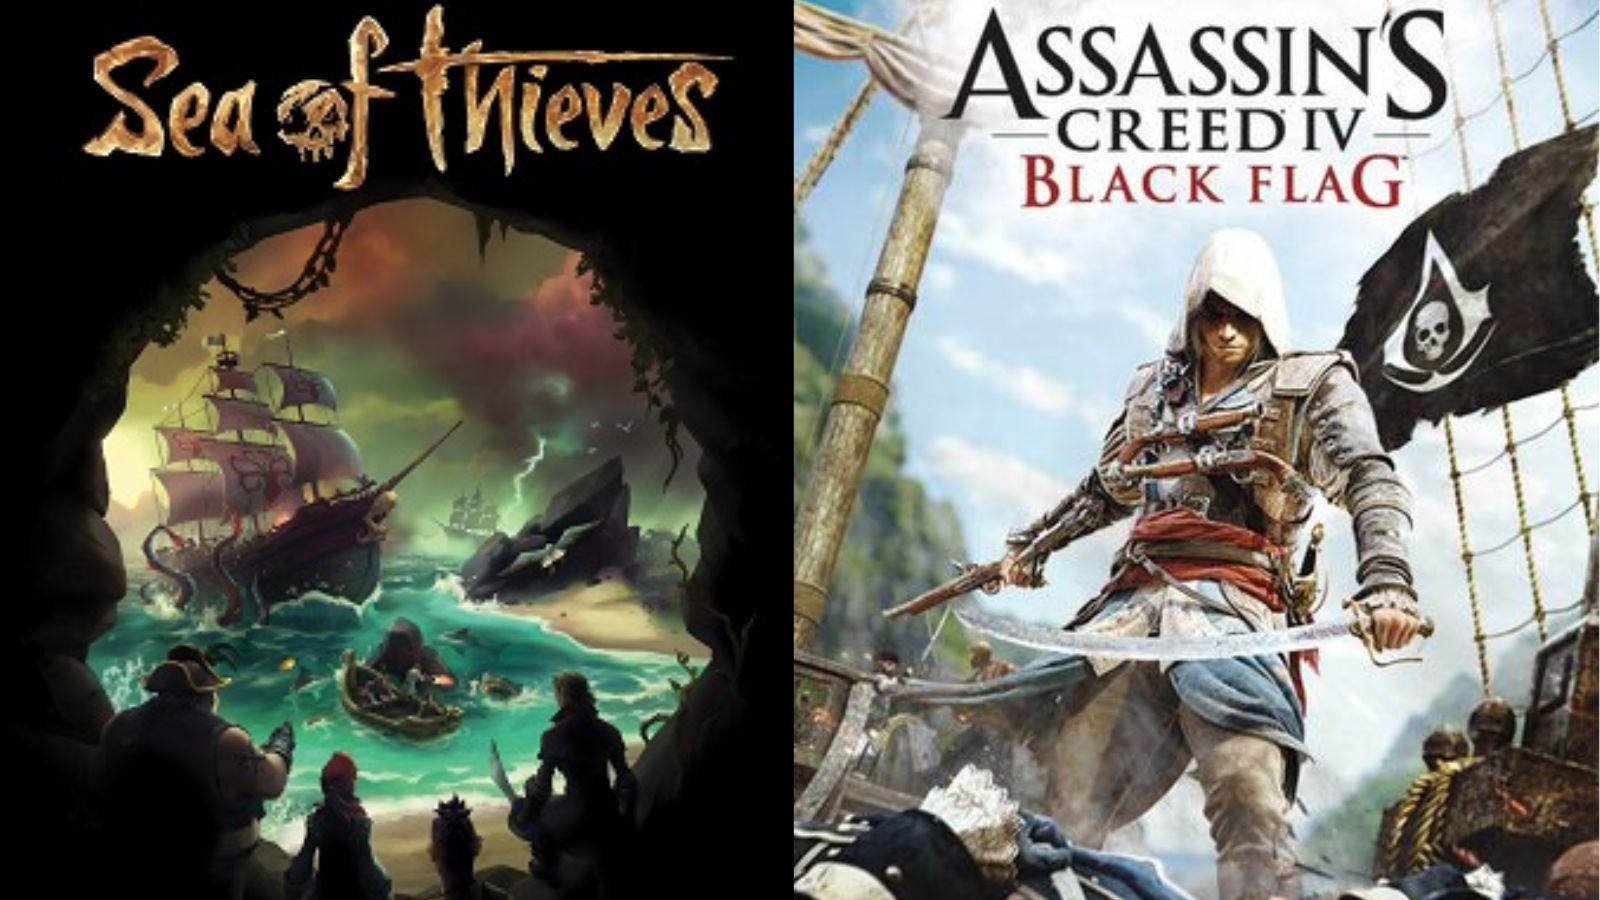 The best pirate games on PC 2023